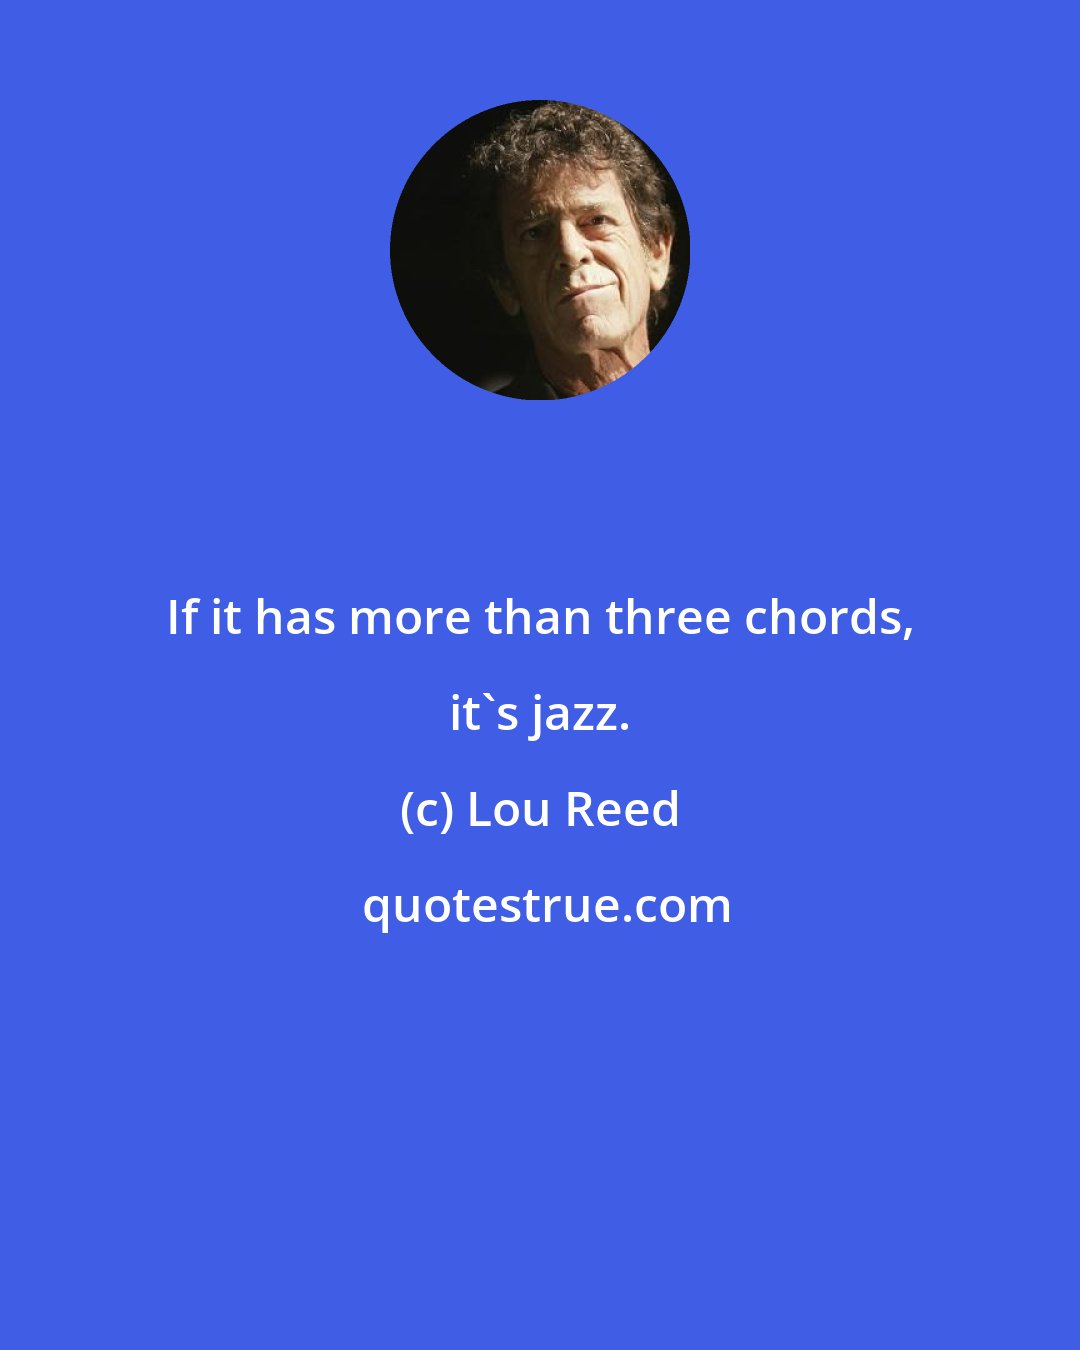 Lou Reed: If it has more than three chords, it's jazz.